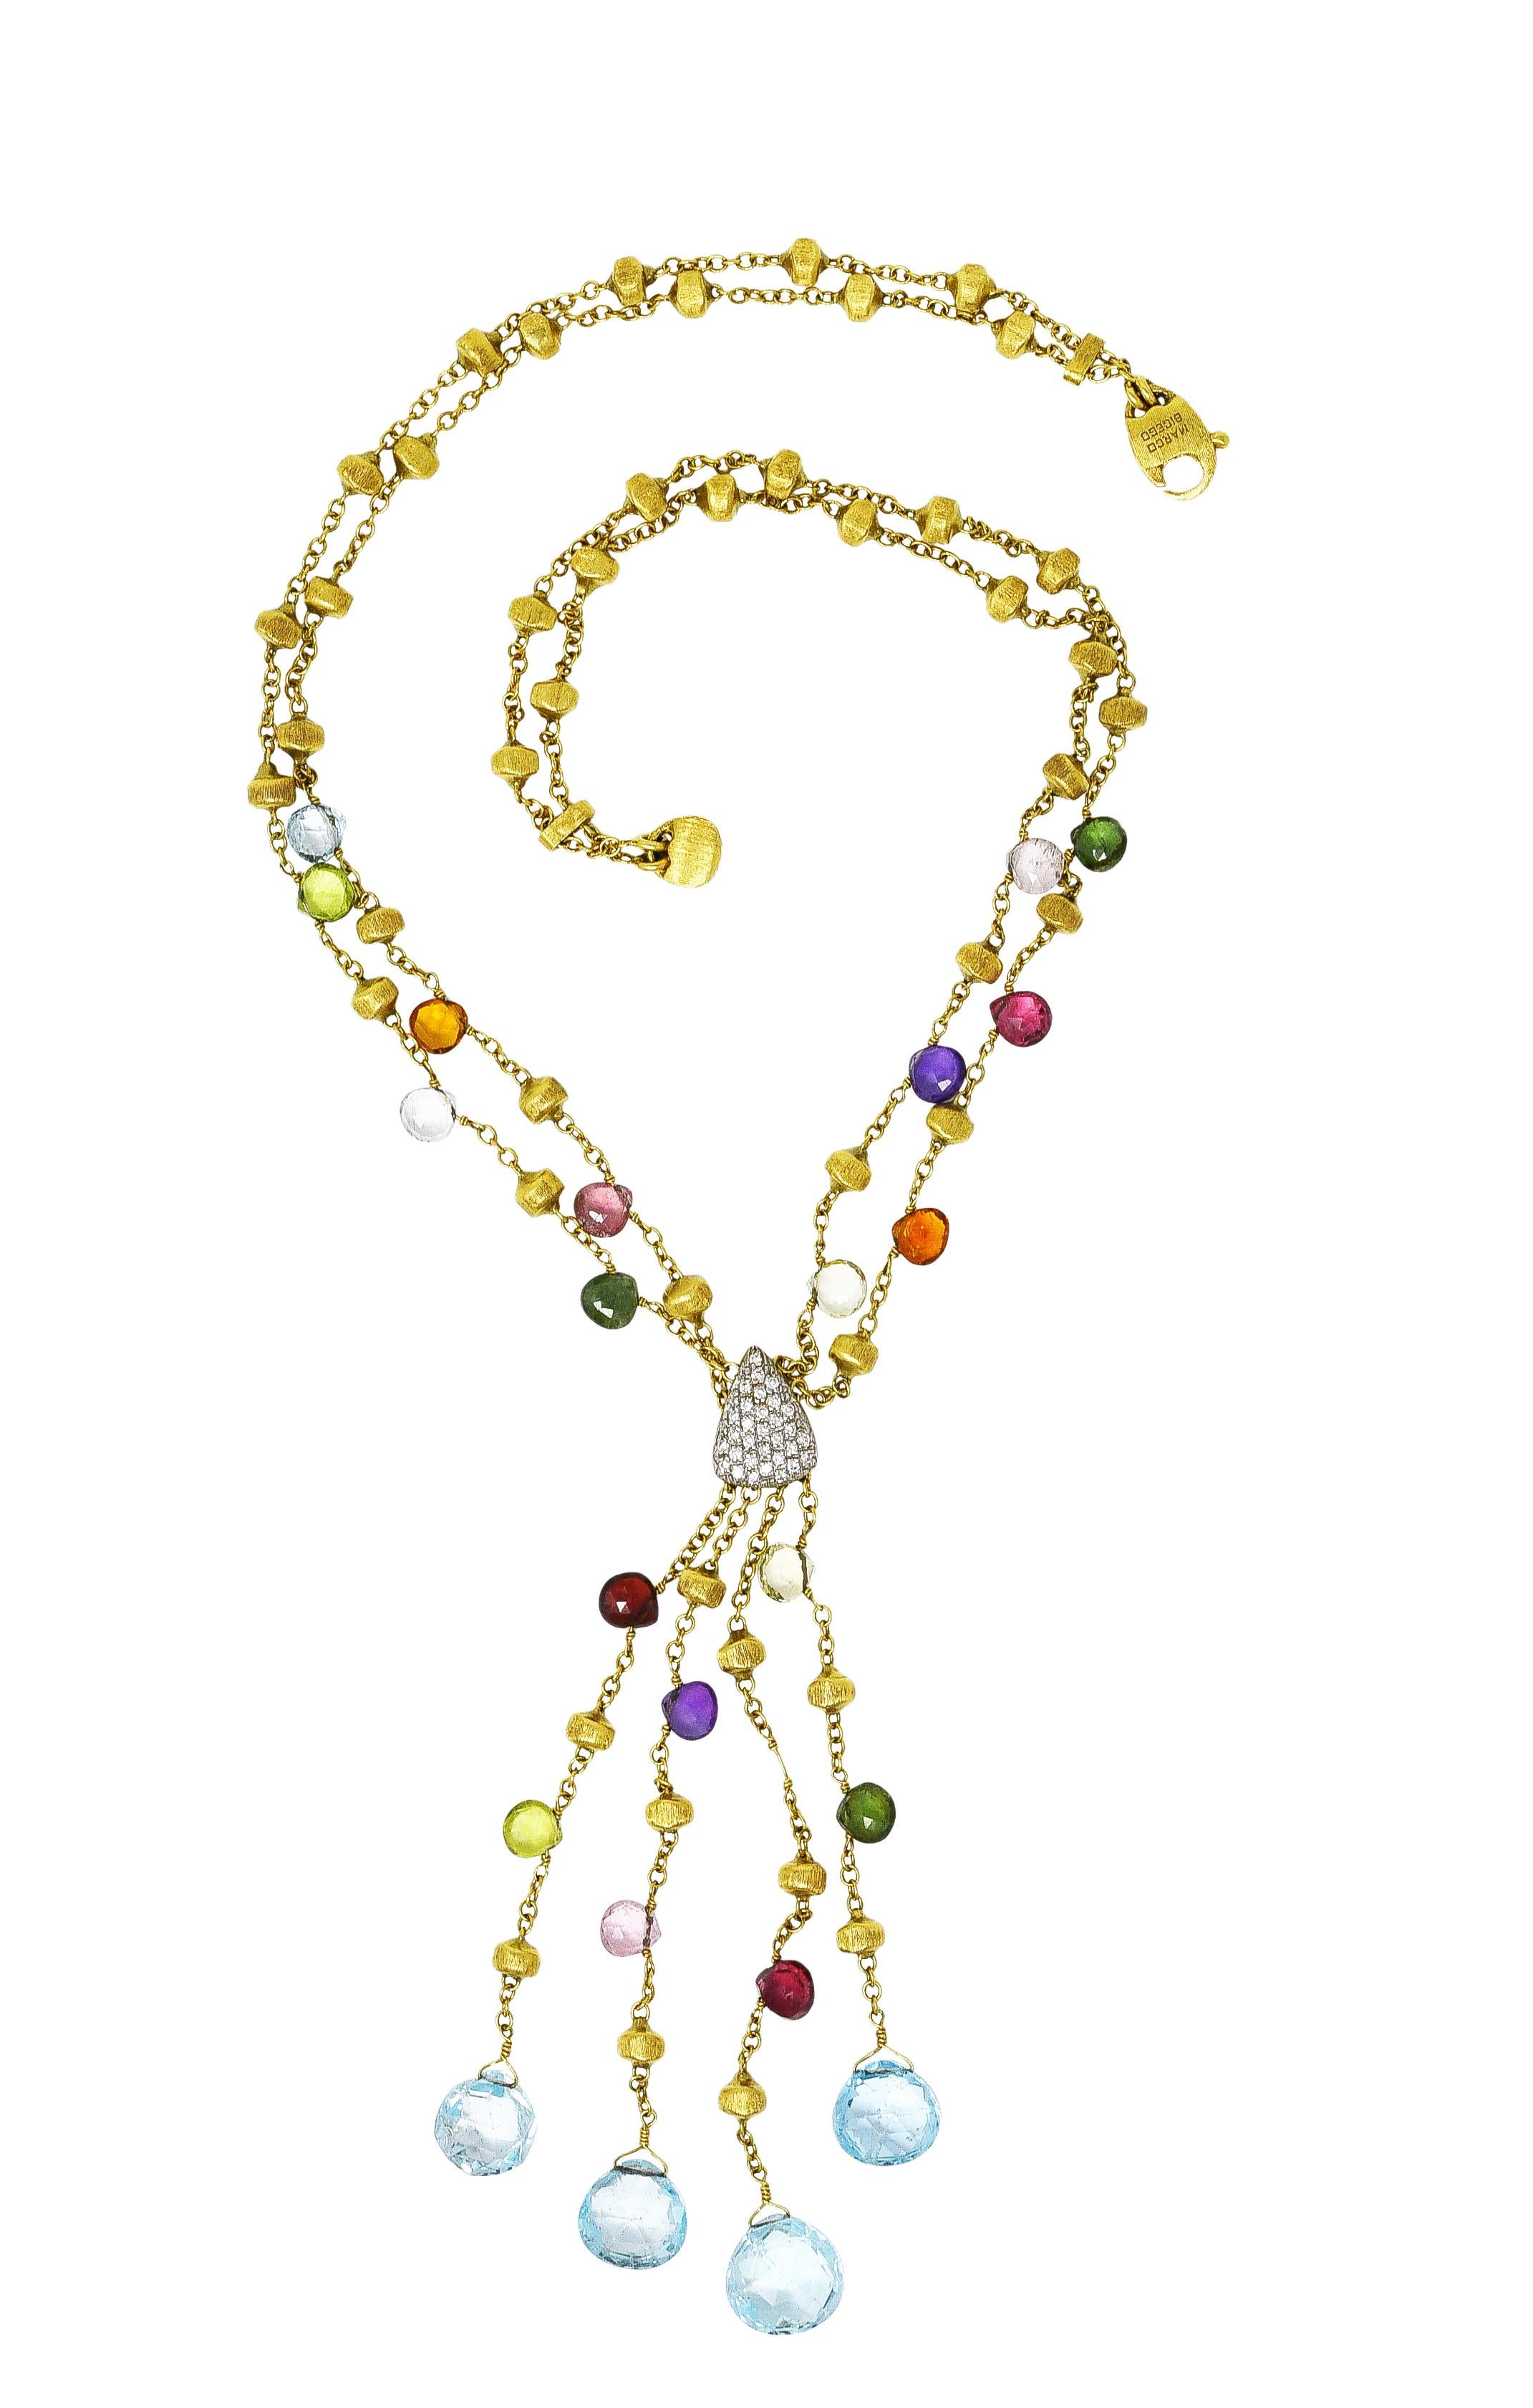 Designed as lariate style necklace of four cable chain strands suspending fringe with blue topaz drops. Cable chain strands are beaded throughout with brushed gold and multi-gem beads. Gemstones are pink tourmaline, green tourmaline, blue topaz,